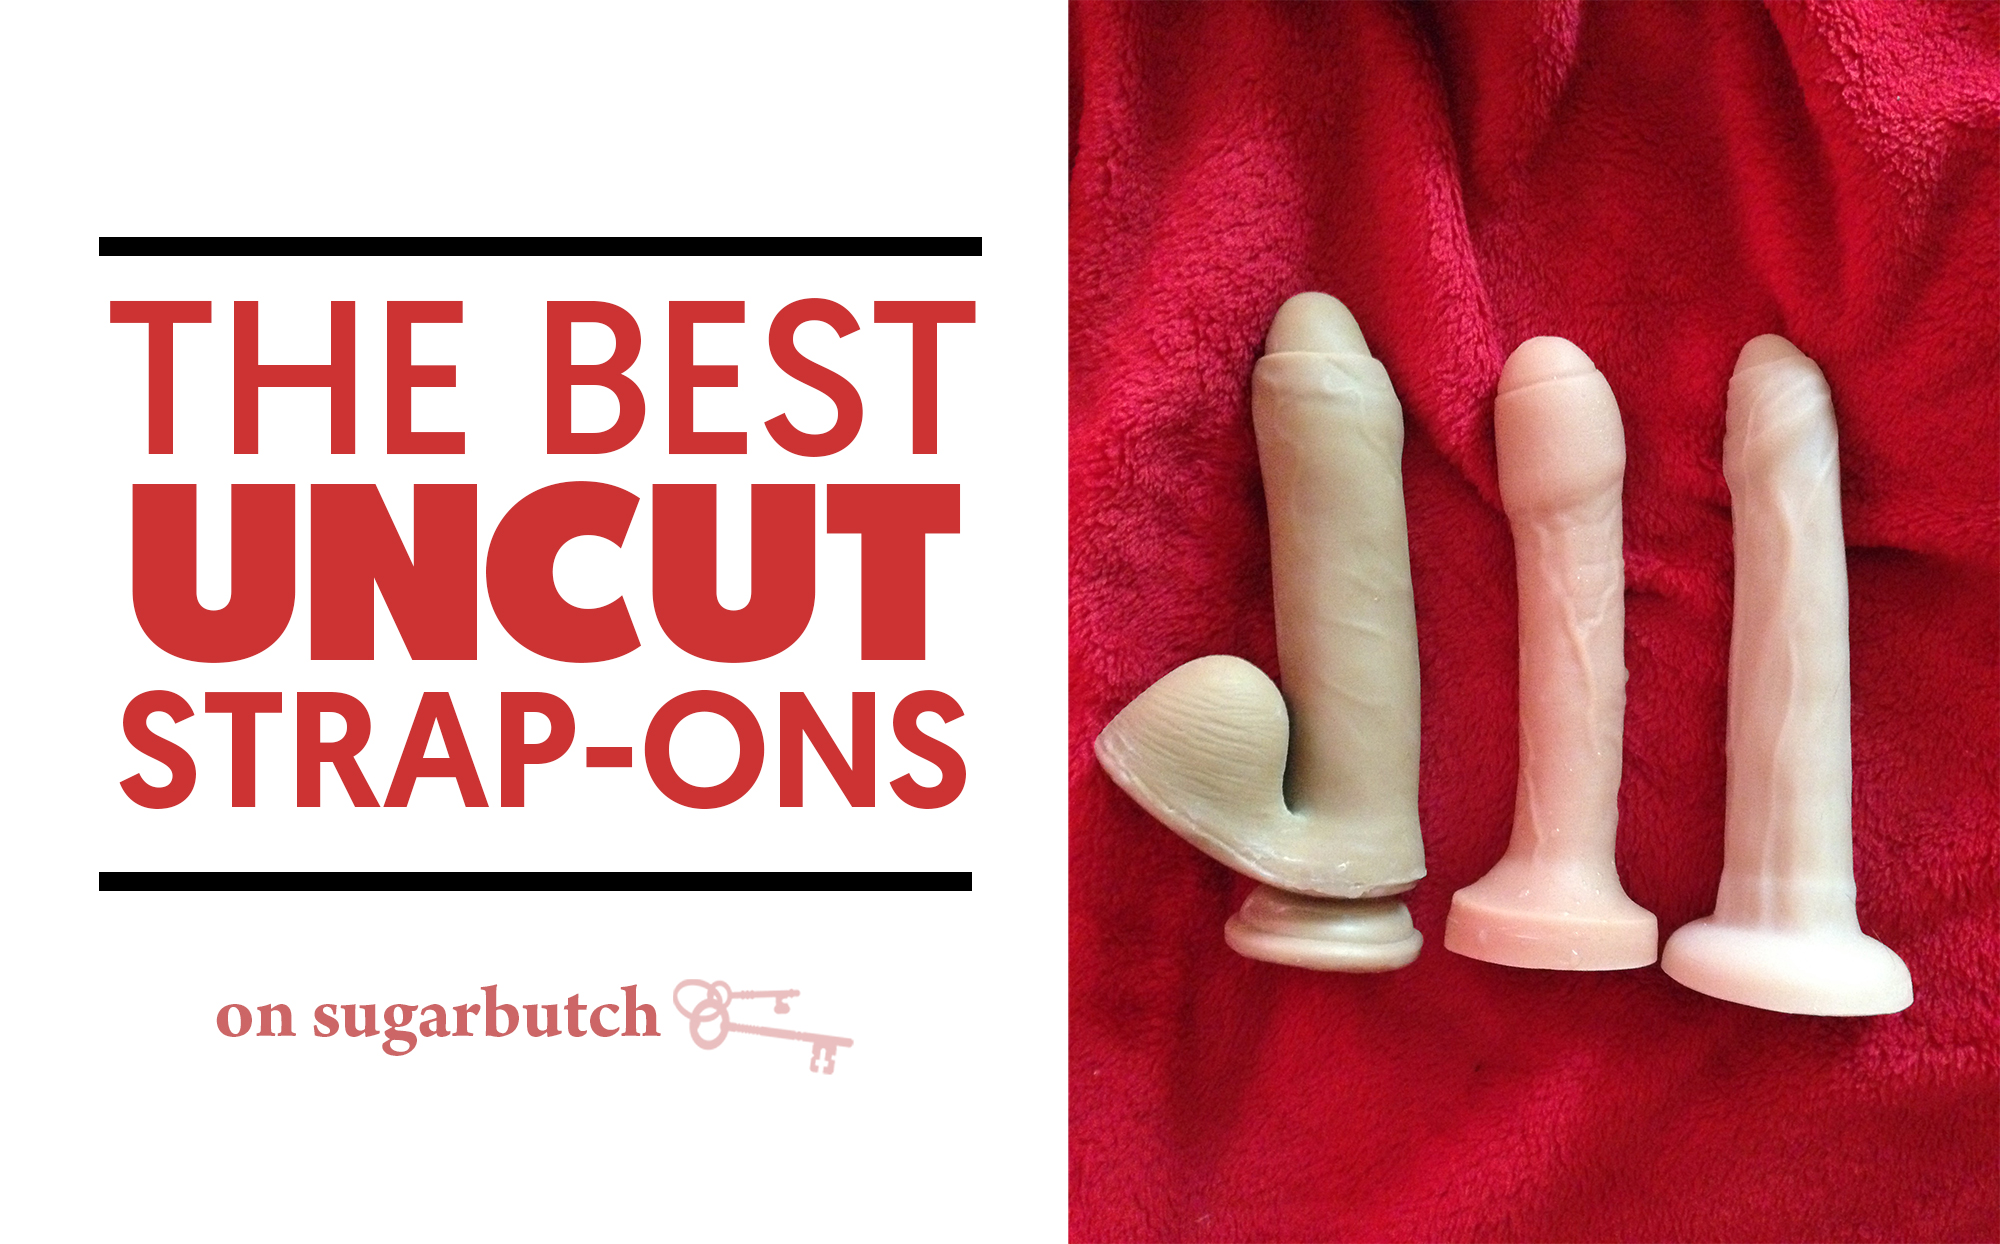 The Best Uncut Strap-Ons: Uncut #1 by Tantus & Ellis by New York Toy Collective